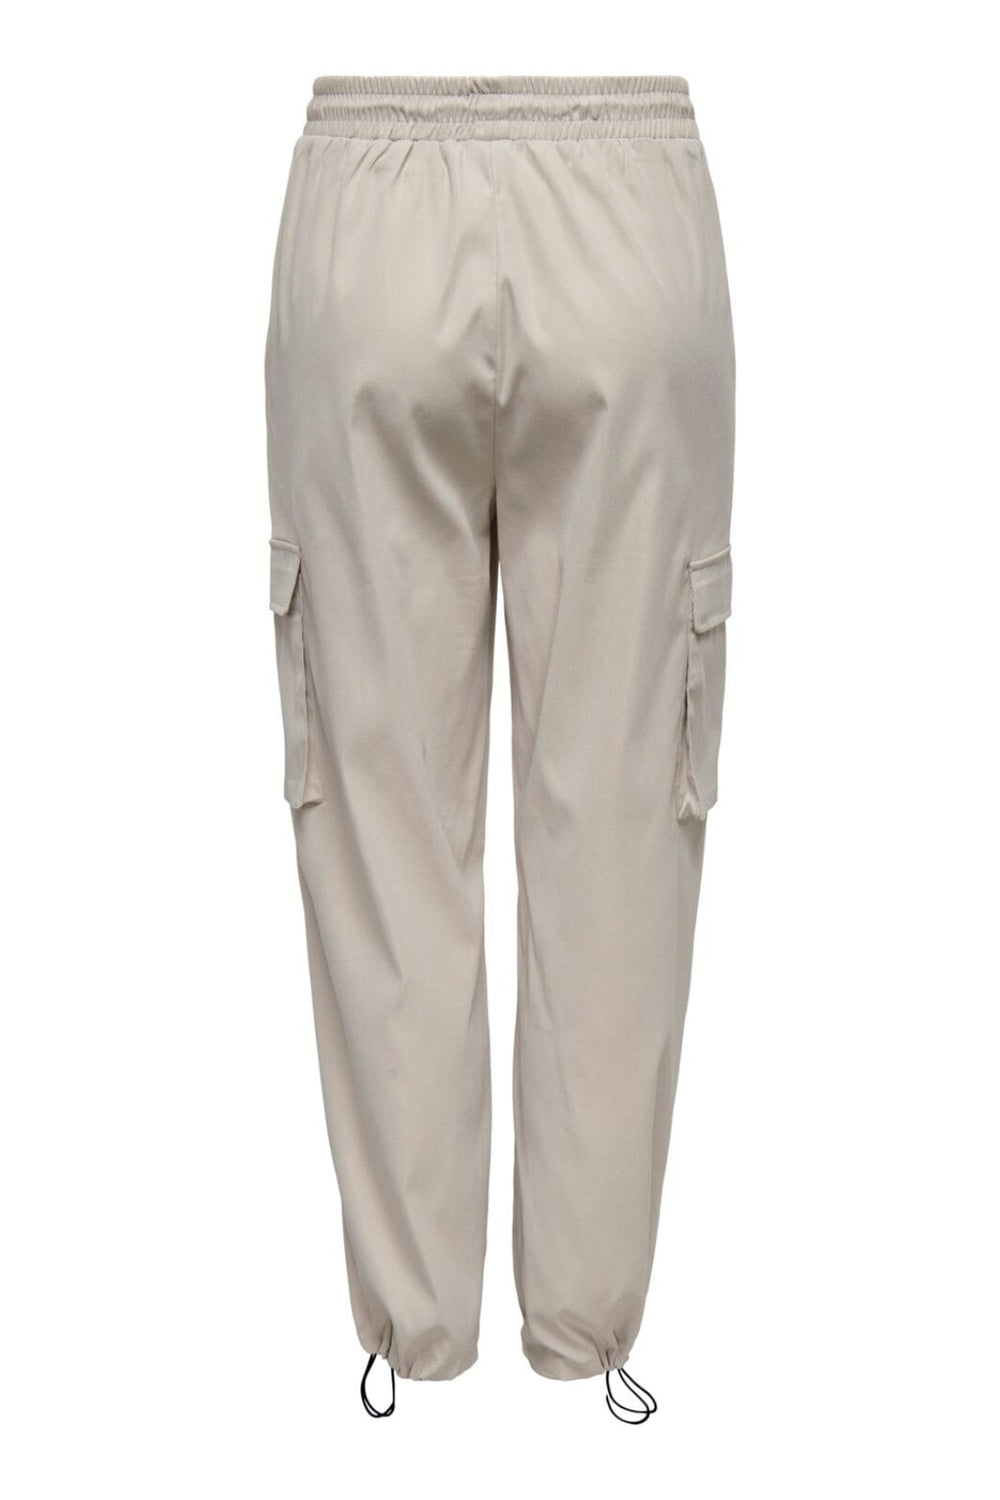 Only - Onlcashi Cargo Pant - 4336934 Chateau Gray Bukser 